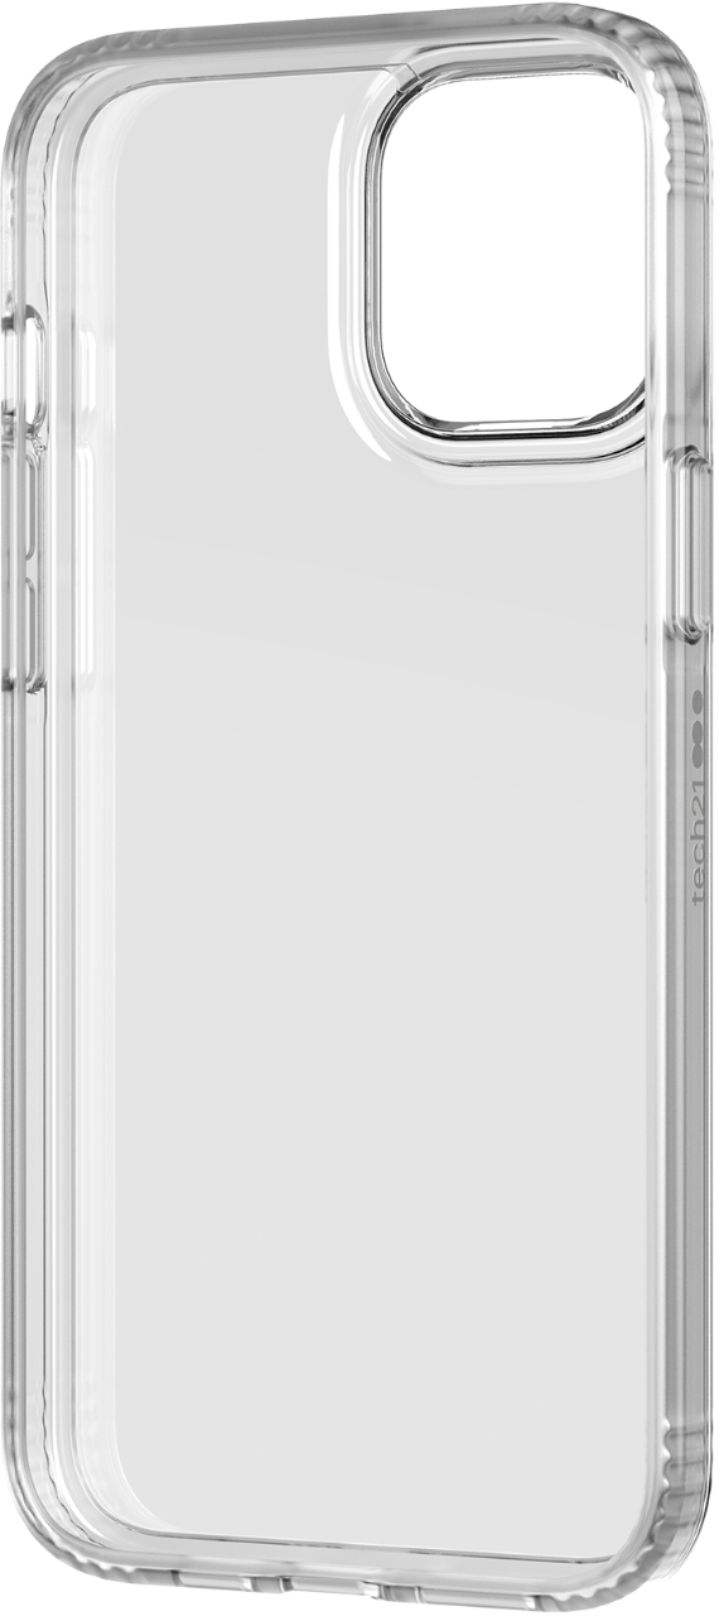 Evo Clear - Apple iPhone 12 Pro Max Case - Clear